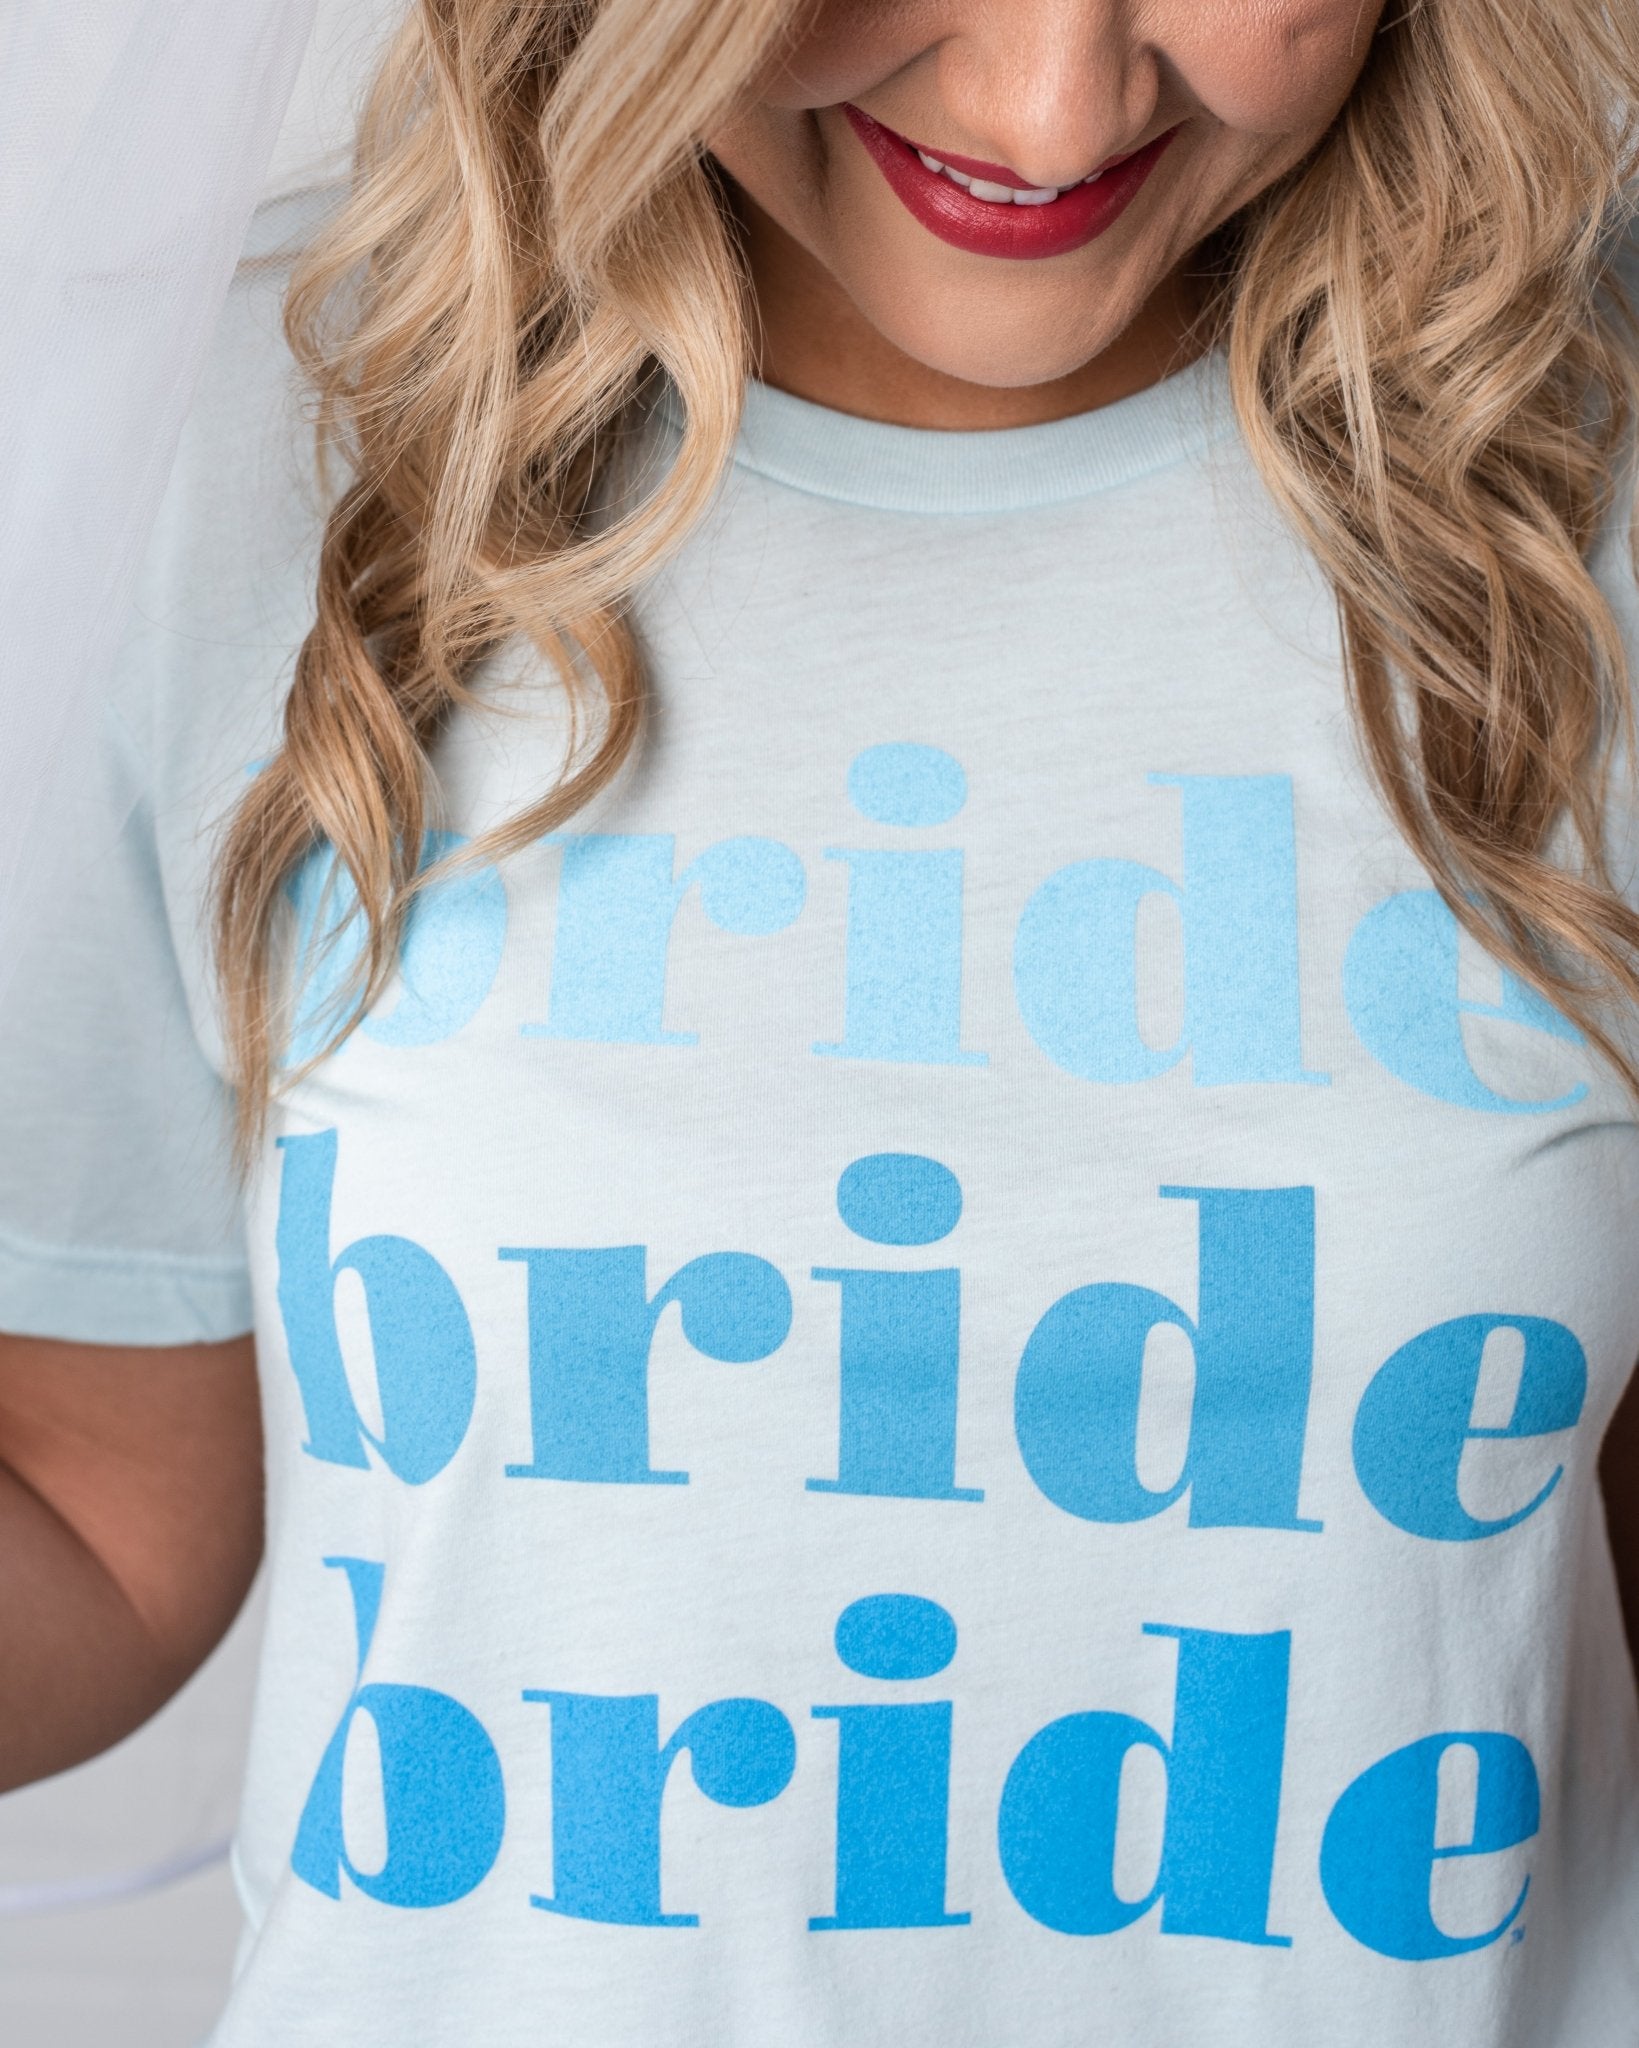 Bridal tees, tanks and more | Lush Fashion Lounge Oklahoma City: online boutiques in Oklahoma, trendy online boutiques, cute bridal tees, bridesmaid graphic tees, bridal party t shirts, cute bridal t shirts, cute bridesmaid t shirts